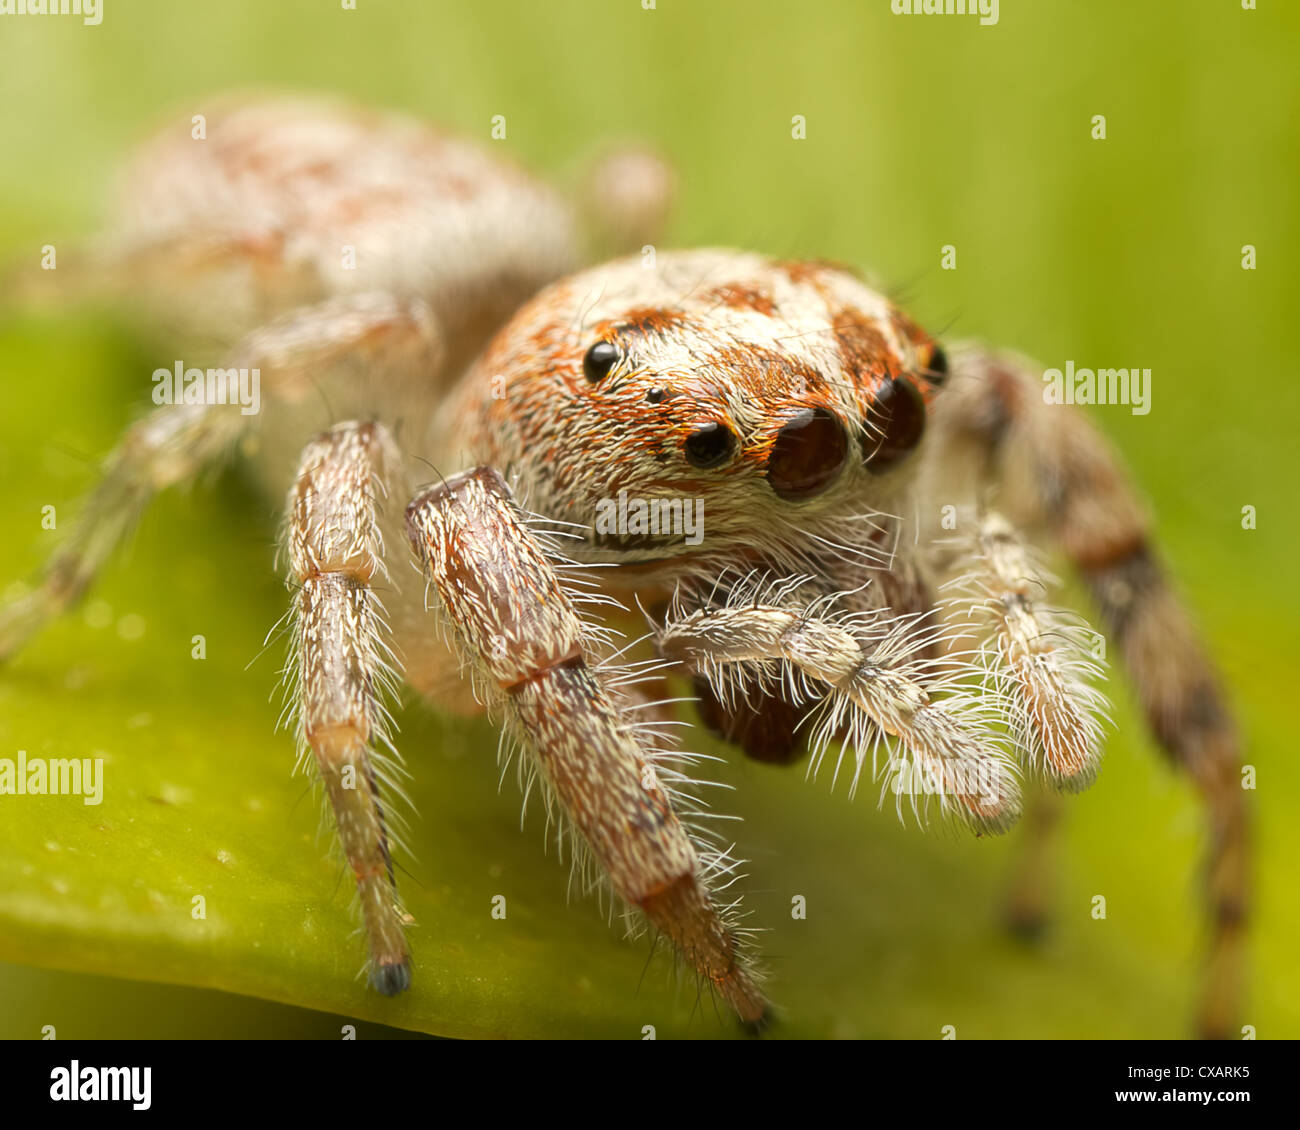 Jumping Spider sitting on a leaf Stock Photo